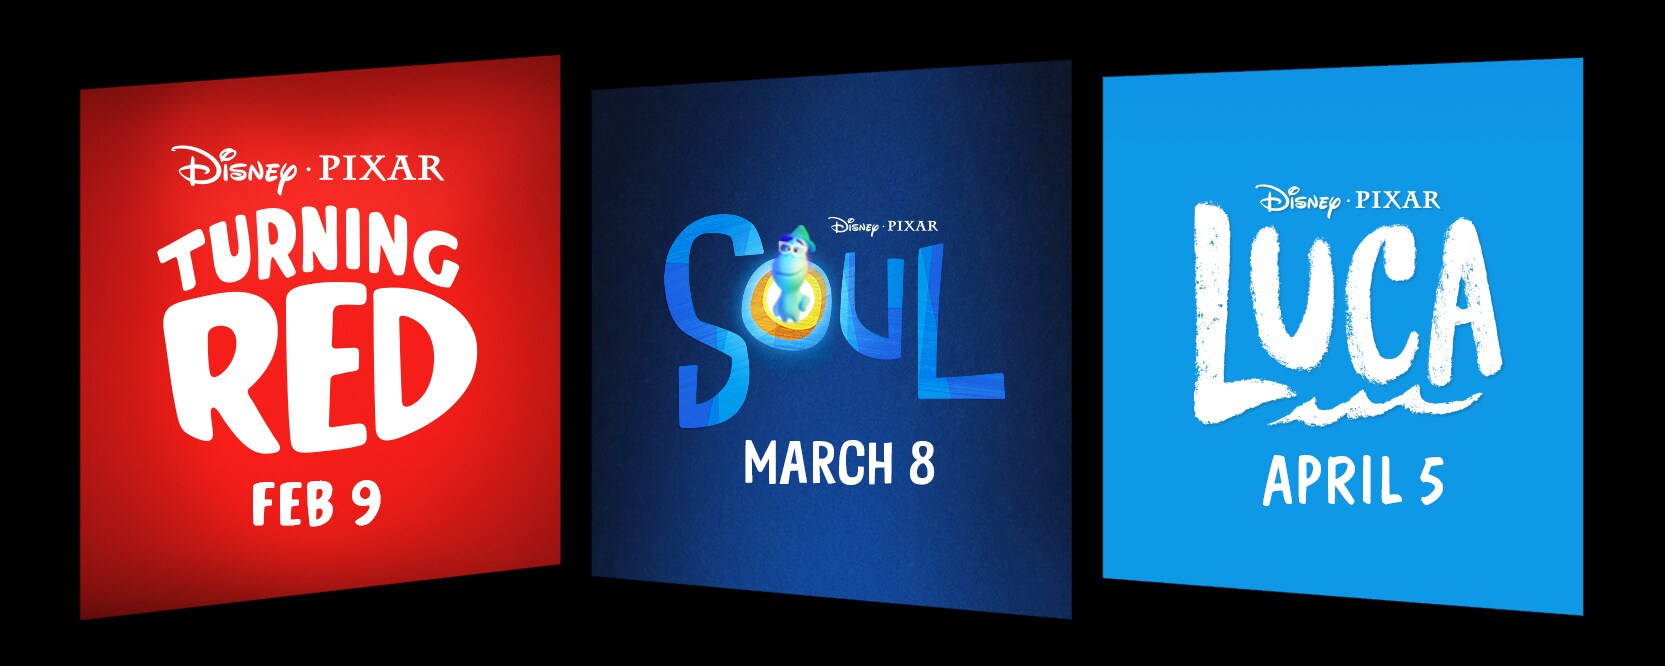 Disney Pixar Movies 'Soul,' 'Luca', 'Turning Red' Getting Theatrical Release